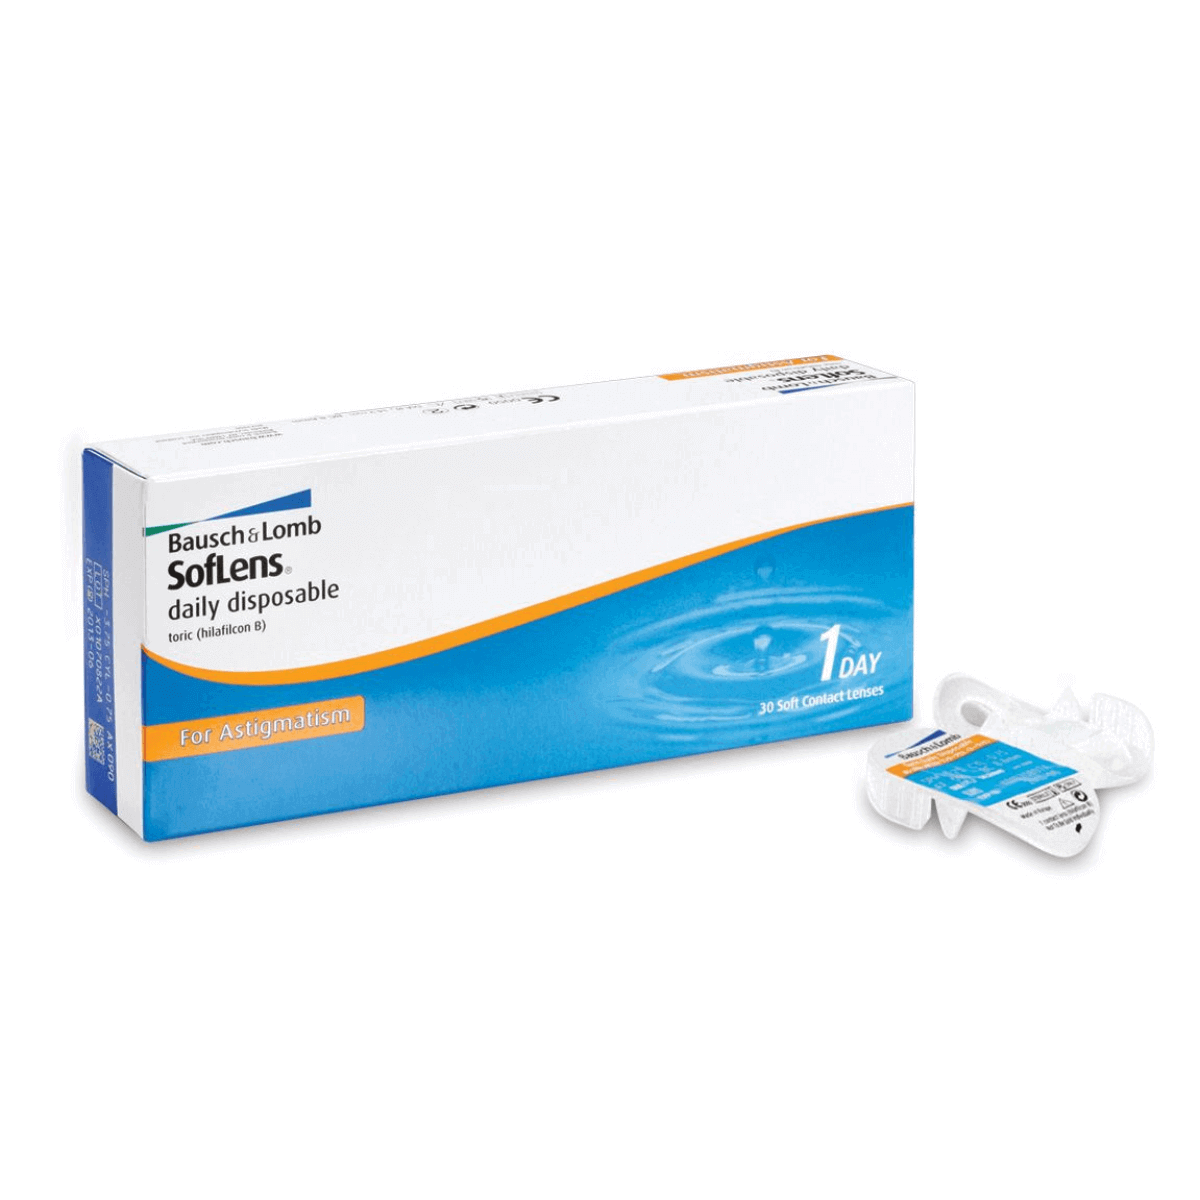 SOFLENS DAILY DISPOSABLE TORIC DAILY DISPOSABLE CONTACT LENSES FOR ASTIGMATISM (30 LENSES)